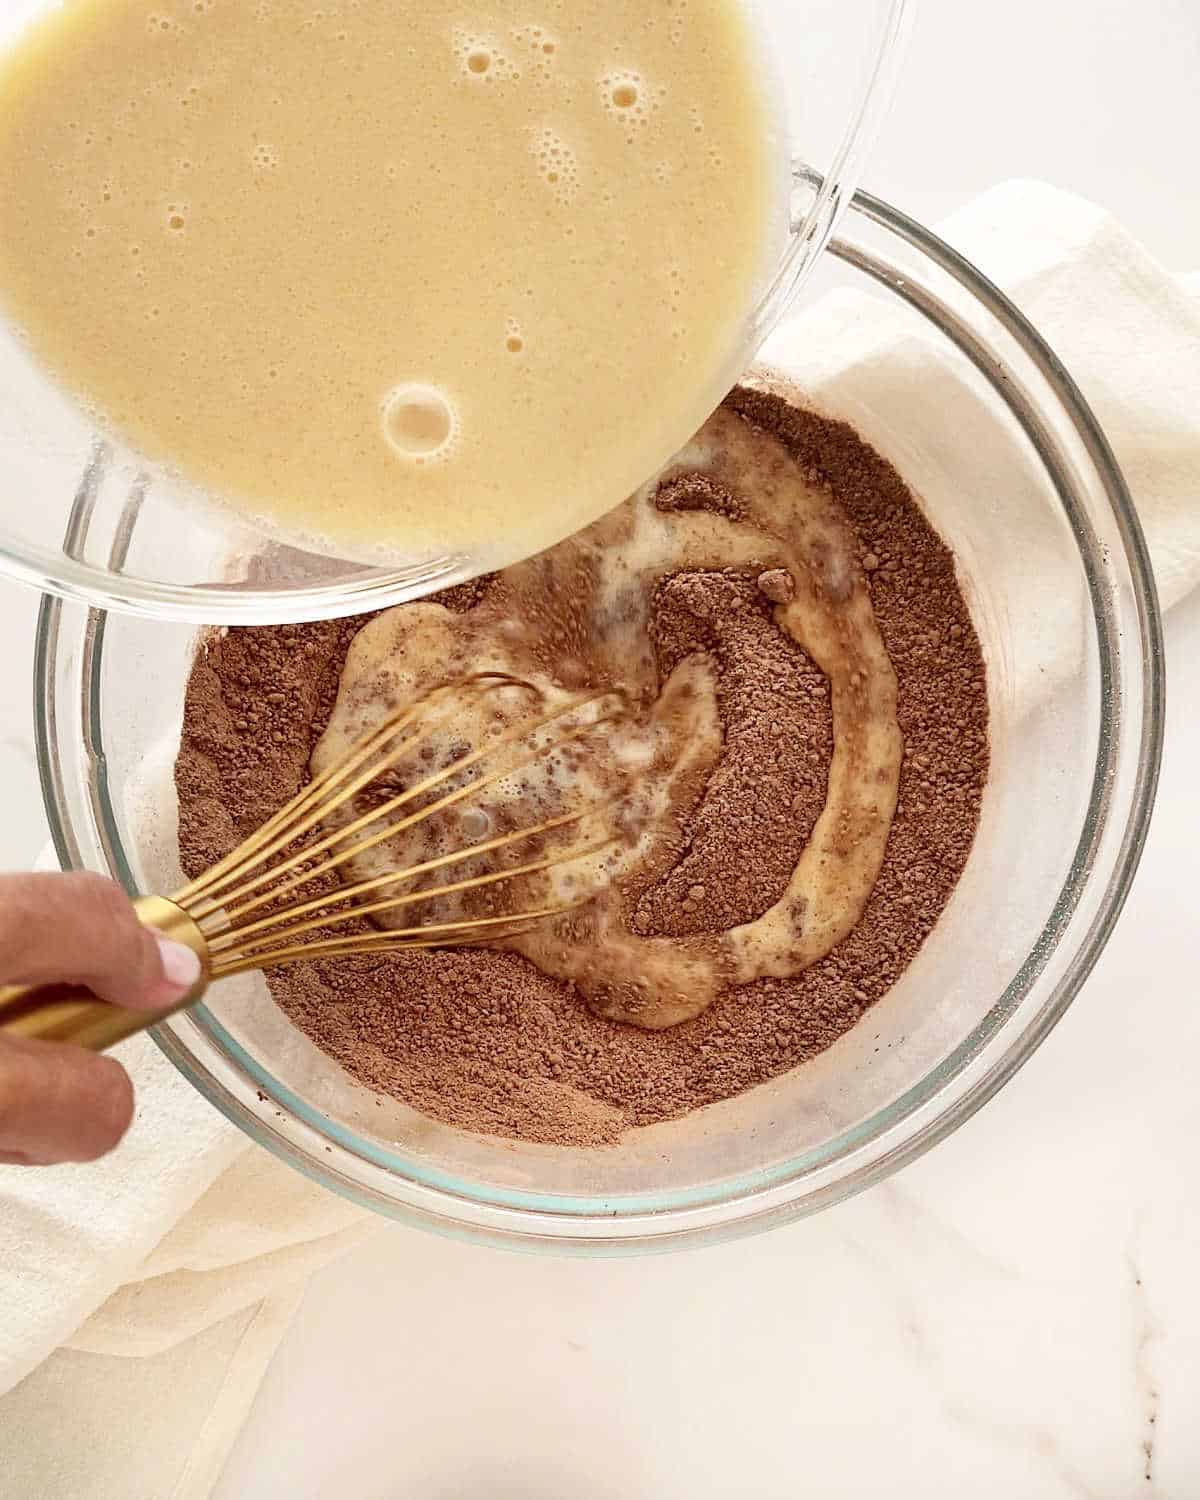 Adding wet ingredients into chocolate cake dry ingredients in a glass bowl on a white surface.